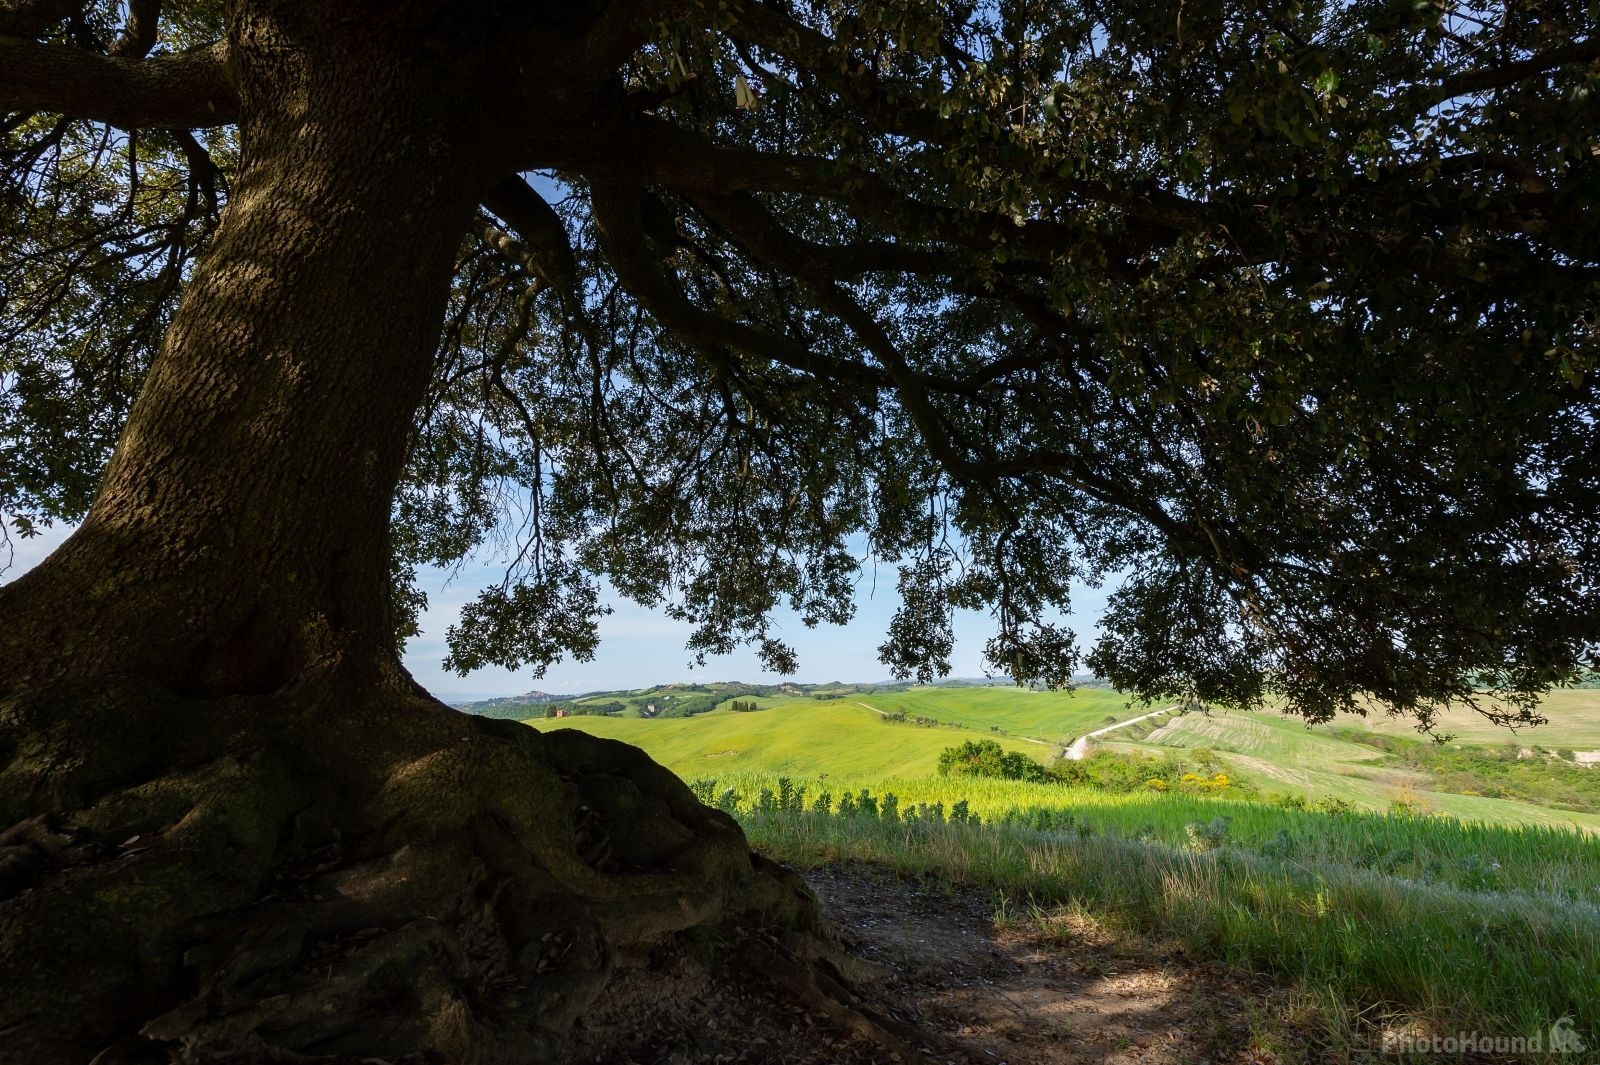 Image of Buonconvento old oak tree by VOJTa Herout